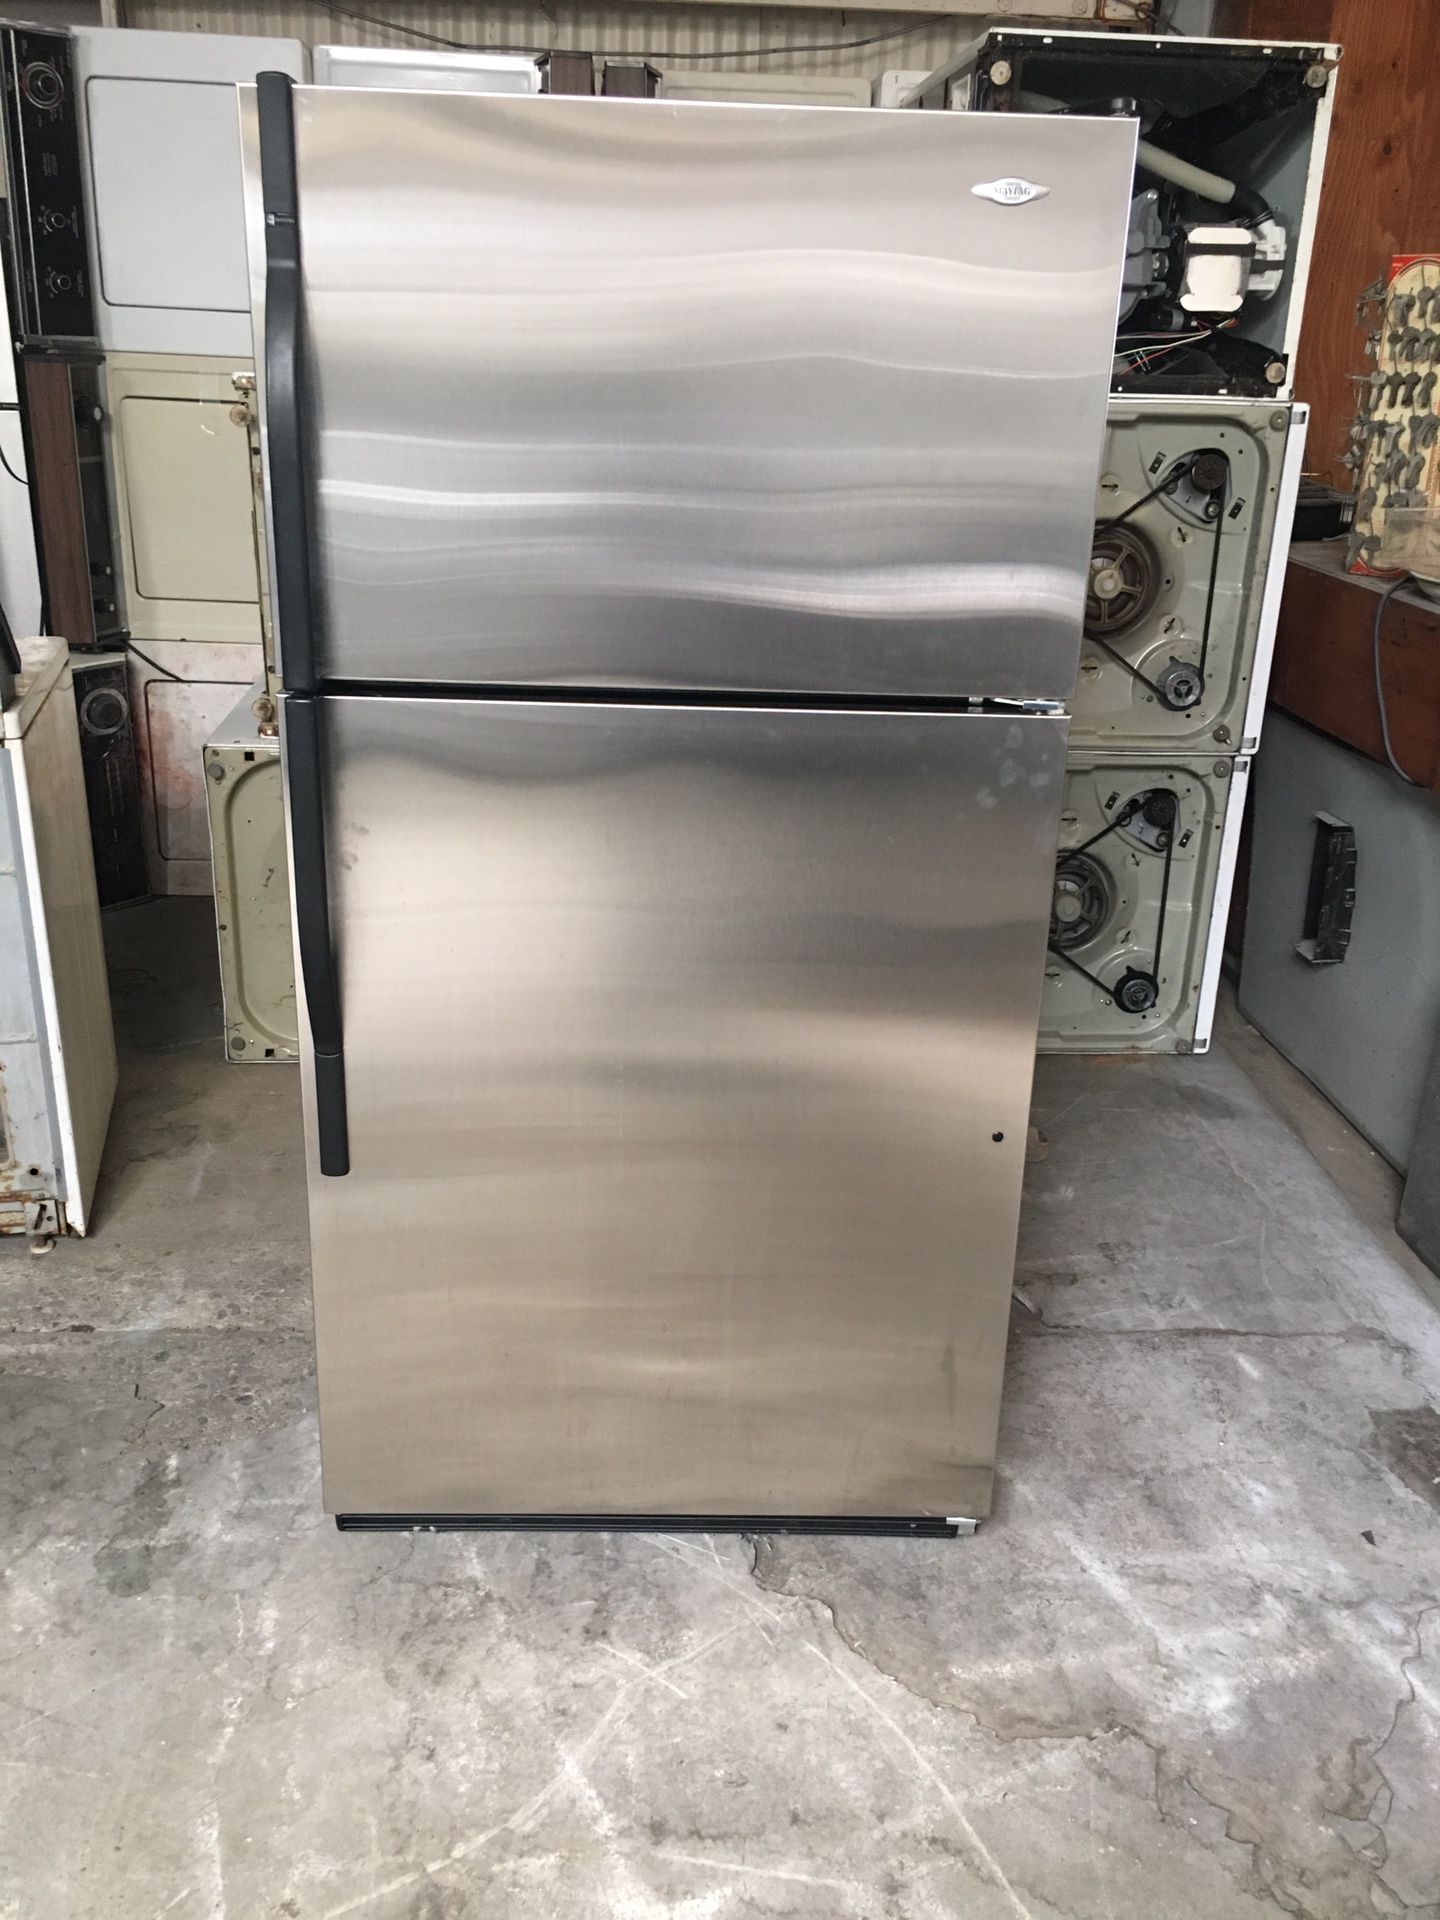 Refrigerator brand Maytag everything is good working condition 90 days warranty delivery and installation